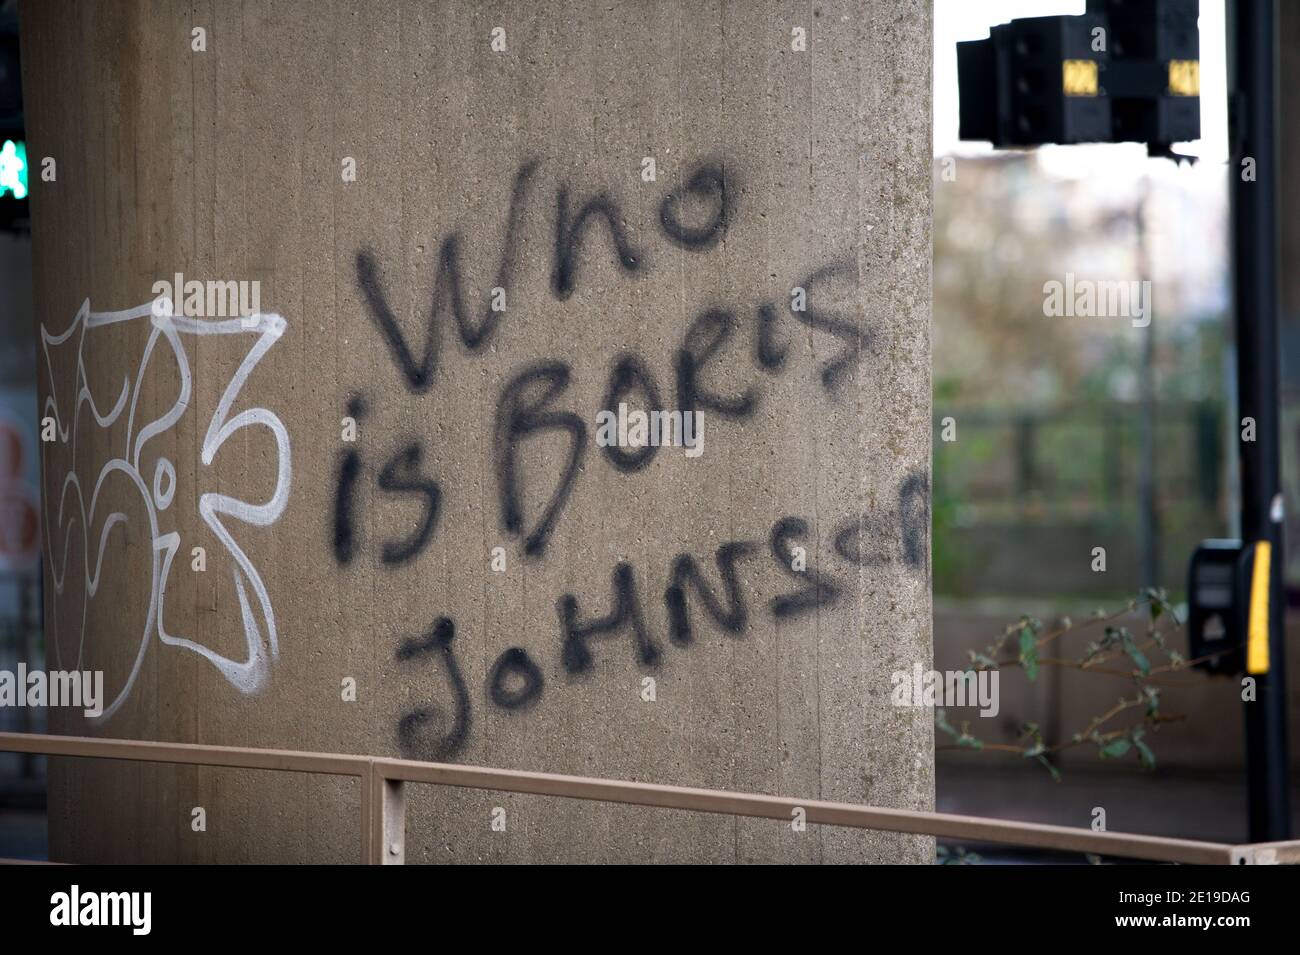 Glasgow, Scotland, UK. 5th Jan, 2021. Pictured: Either somebody has been living in a cave for a while or they are trying to make a point, their graffiti on the Kingston Bridge, “WHO IS Boris Johnson”. As of 00:01 this morning Scotland has been placed into another lockdown as per the Scottish First Minister's address at 2pm yesterday. Only essential travel is allowed such as going to work and essential food shopping and exercise, other than that everyone must stay in their homes. Credit: Colin Fisher/Alamy Live News Stock Photo